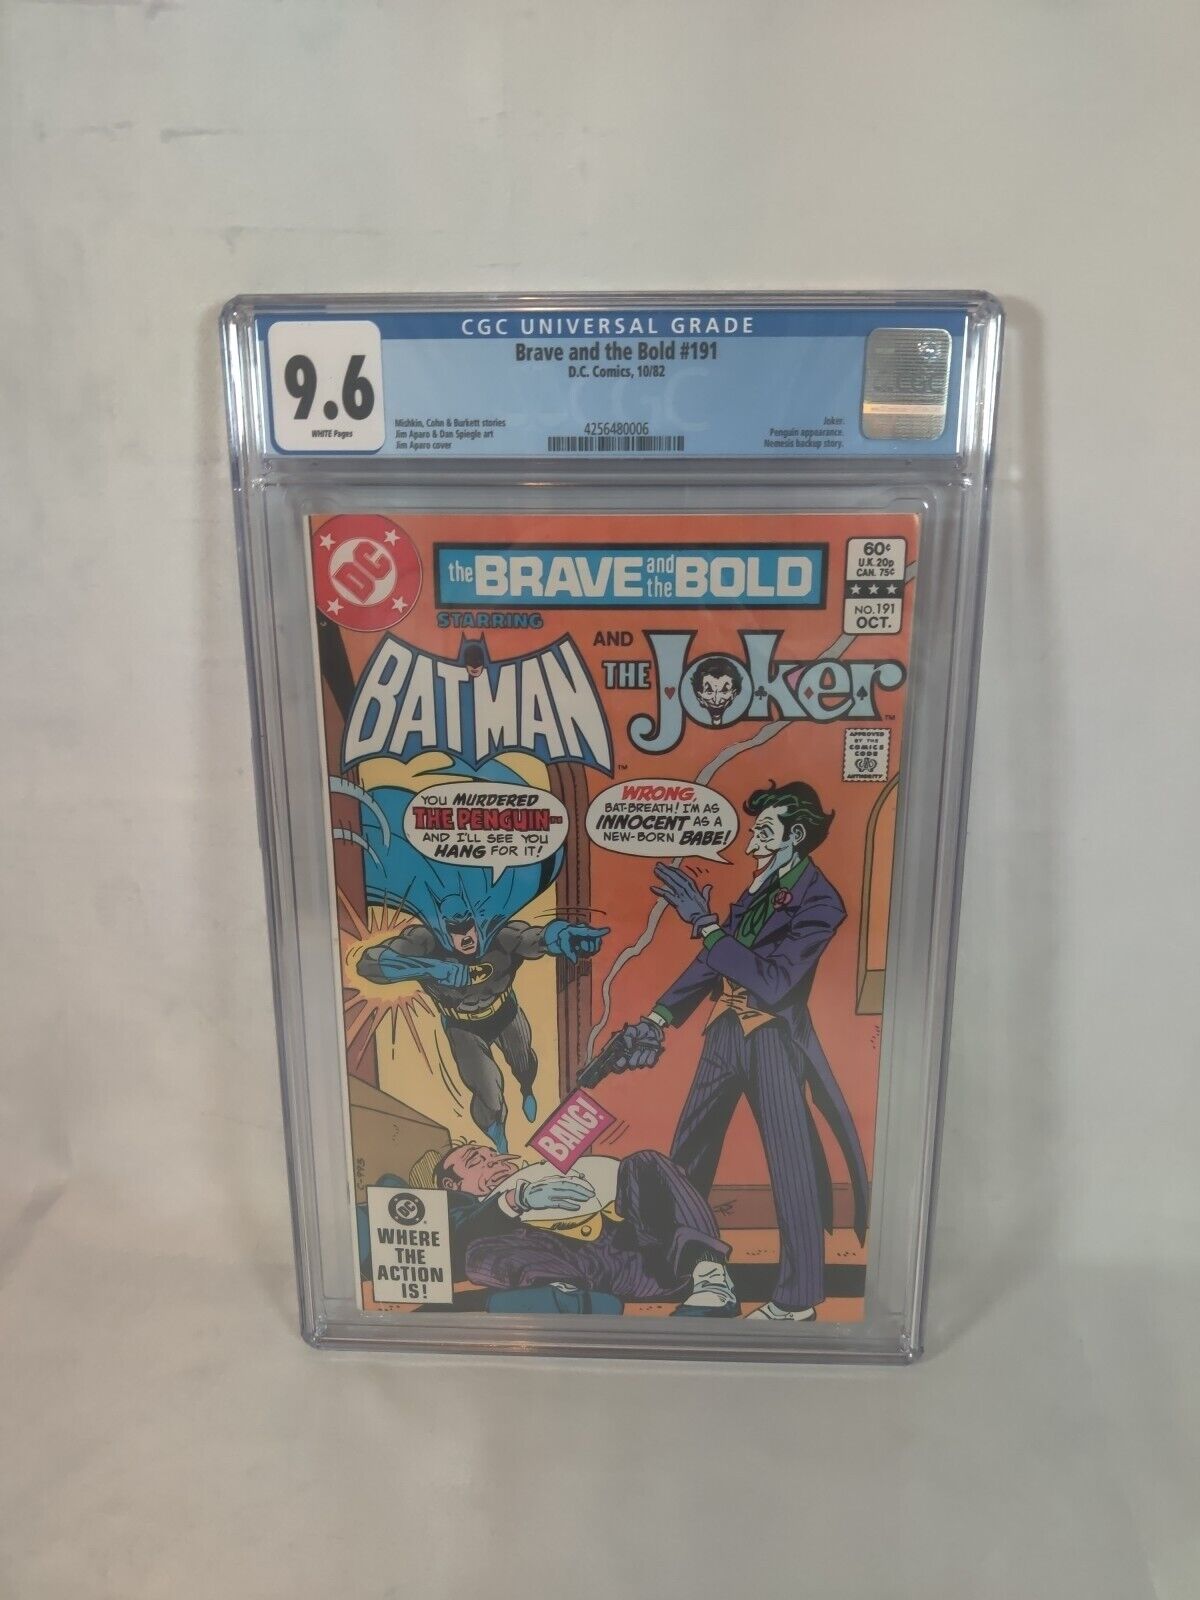 BRAVE AND THE BOLD #191 (1982 DC Comics) CGC 9.6 NM+ JOKER COVER AND STORY